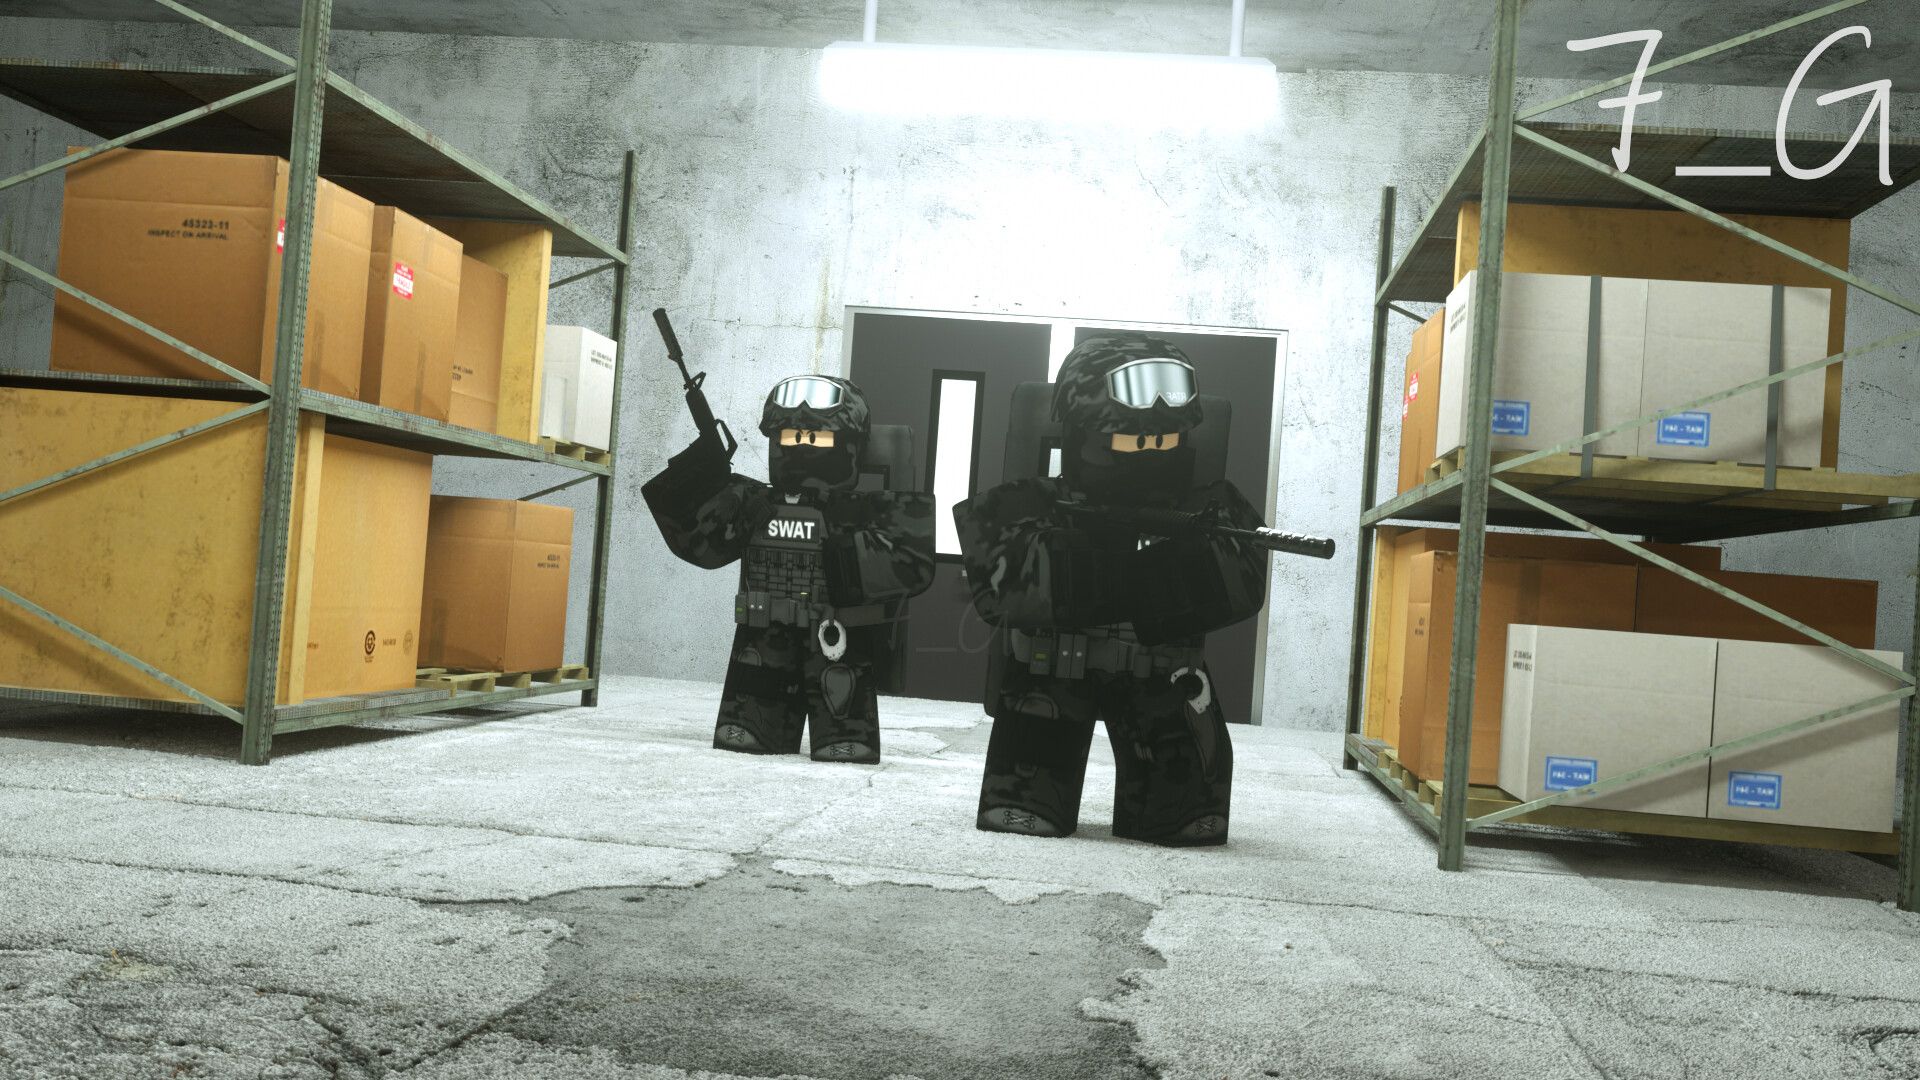 Swat duo, 7_Ghxst